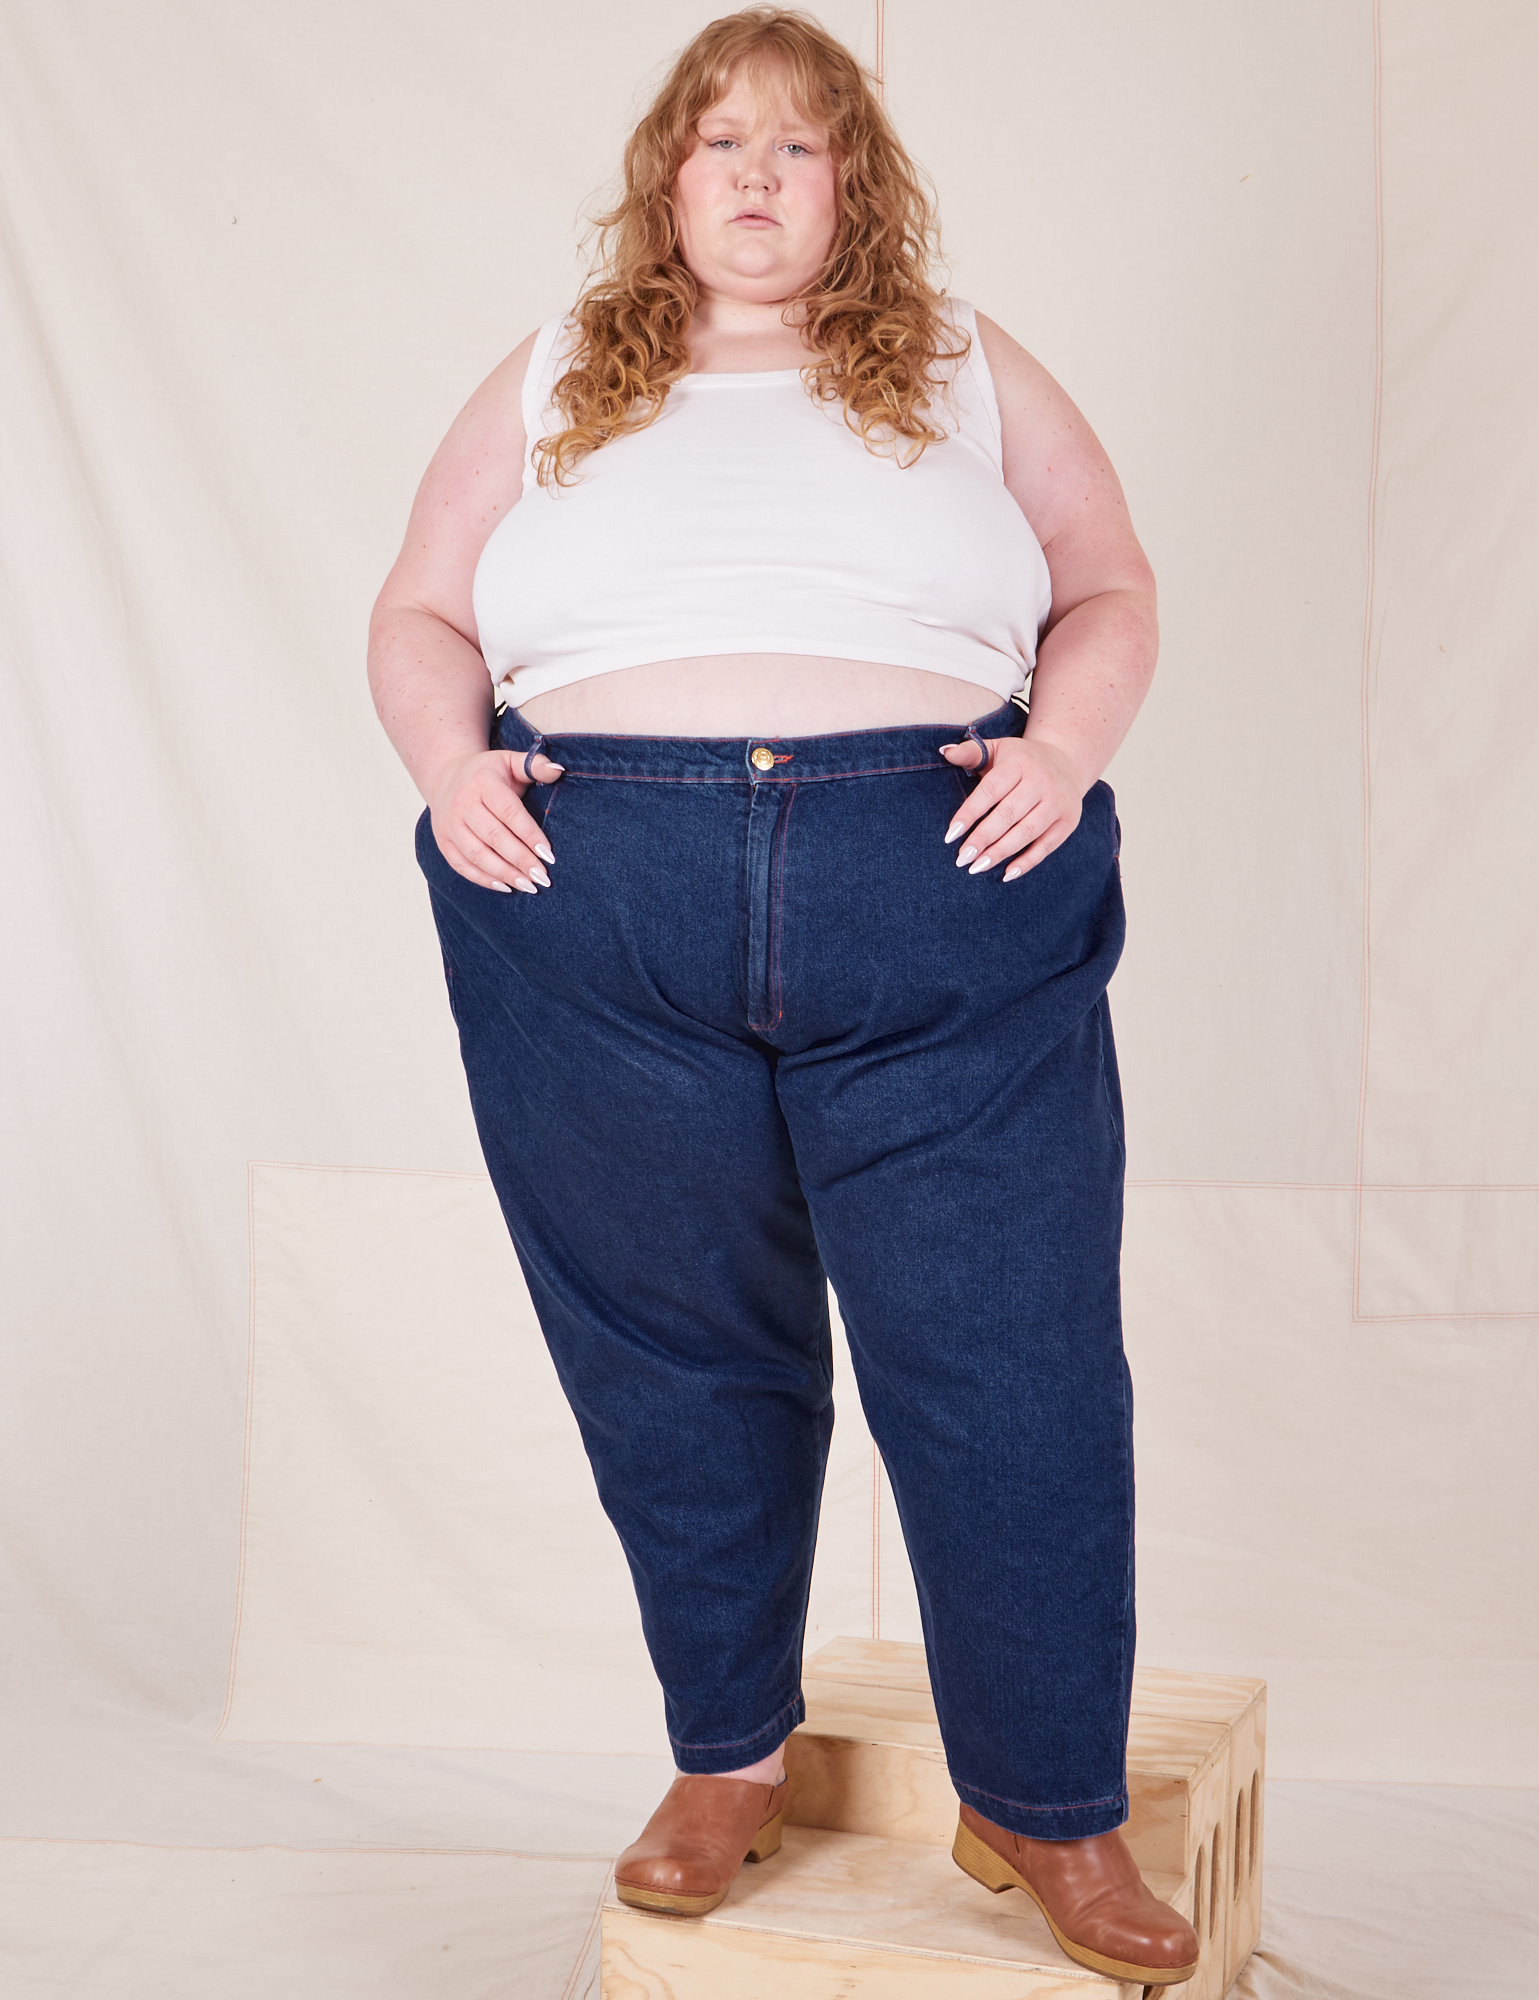 Catie is 5&#39;11&quot; and wearing 4XL Denim Trouser Jeans in Dark Wash paired with a Tank Top in vintage tee off-white